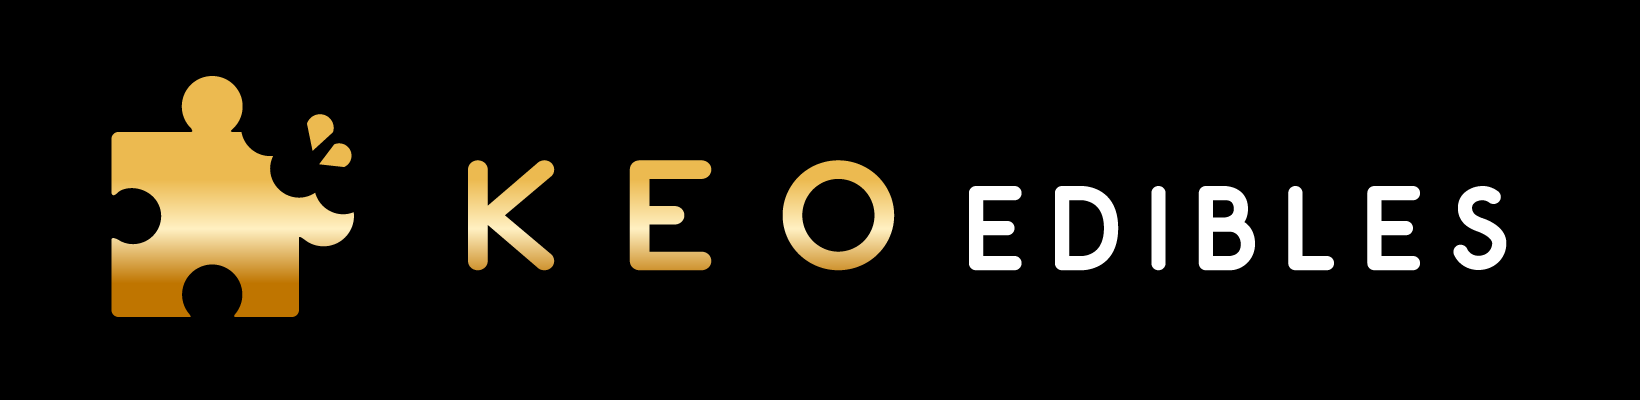 Keo Edibles-From Trusted Canadian Producers